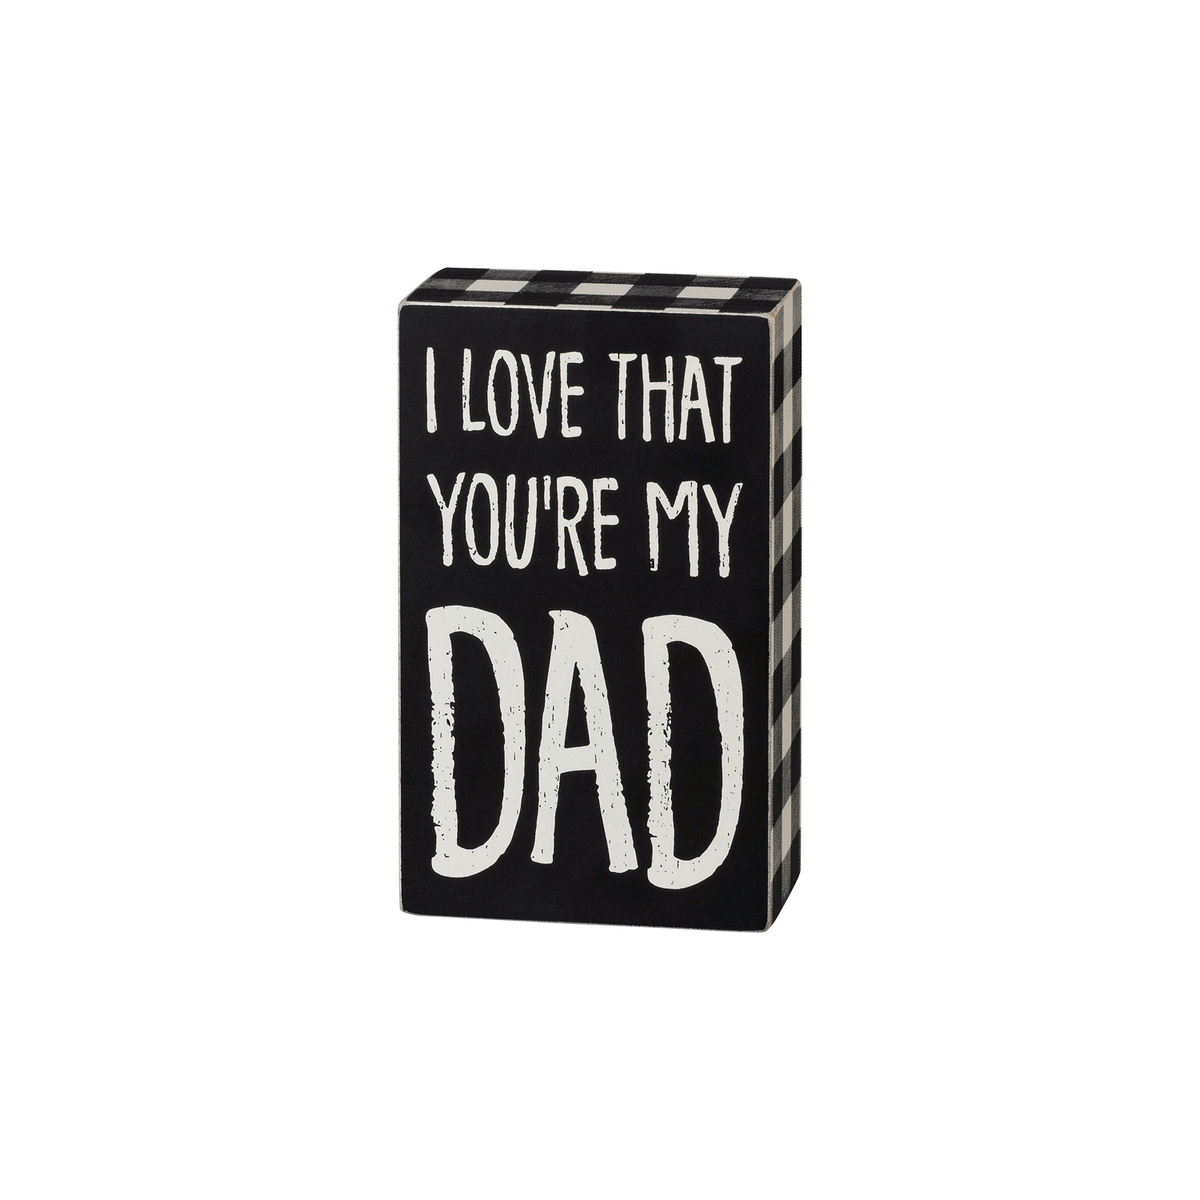 I Love That You’re My Dad Plaid Box Sign - Signs & More